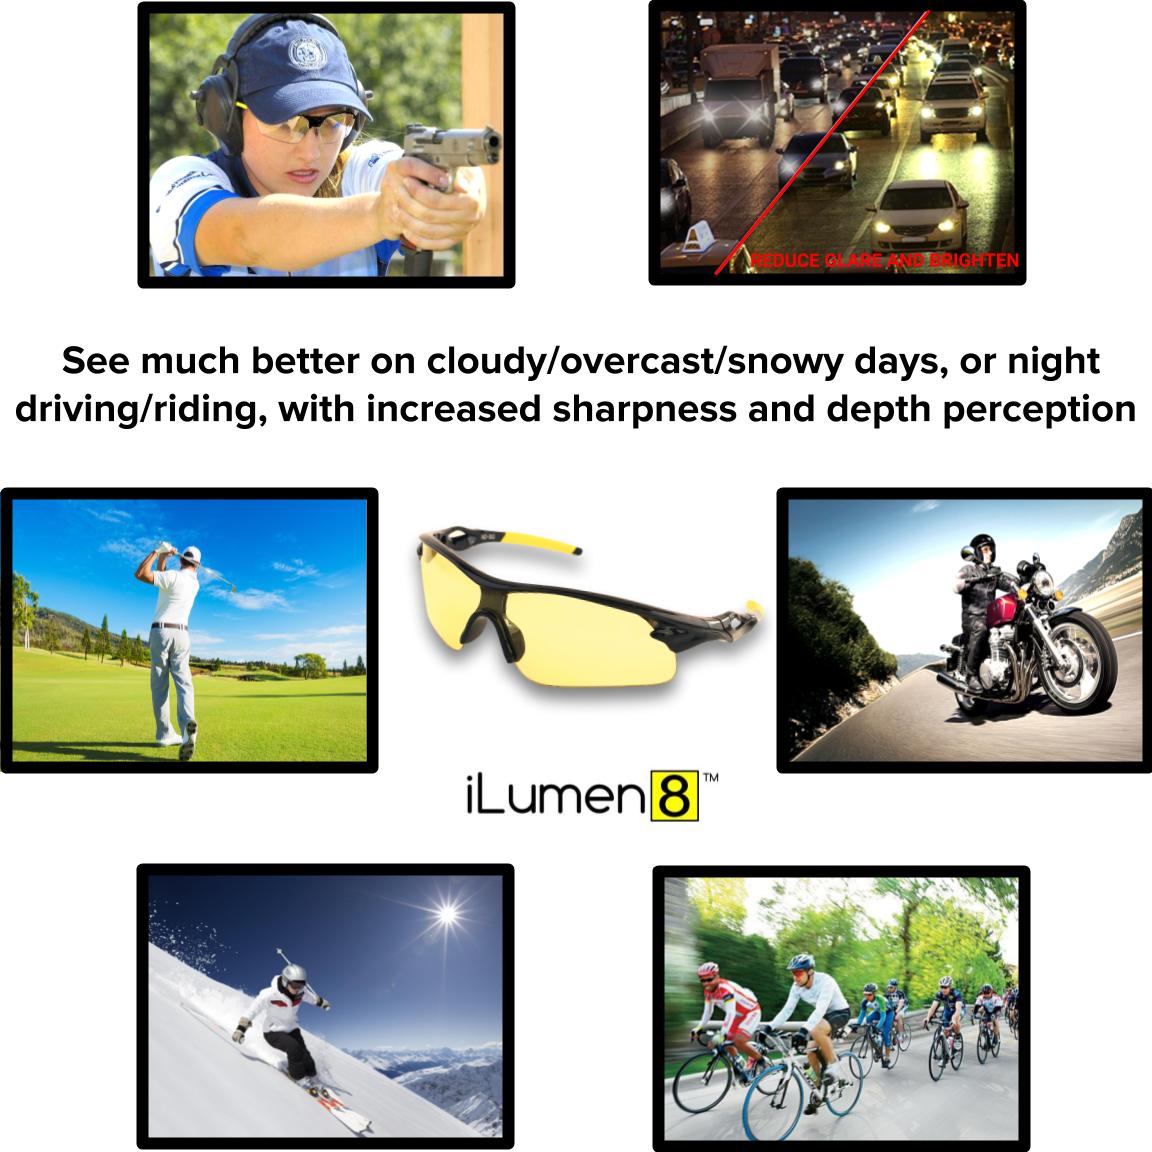 Night Driving HD Anti-Reflective Vision Polarized Glasses Yellow Tinted  Mixed Gl